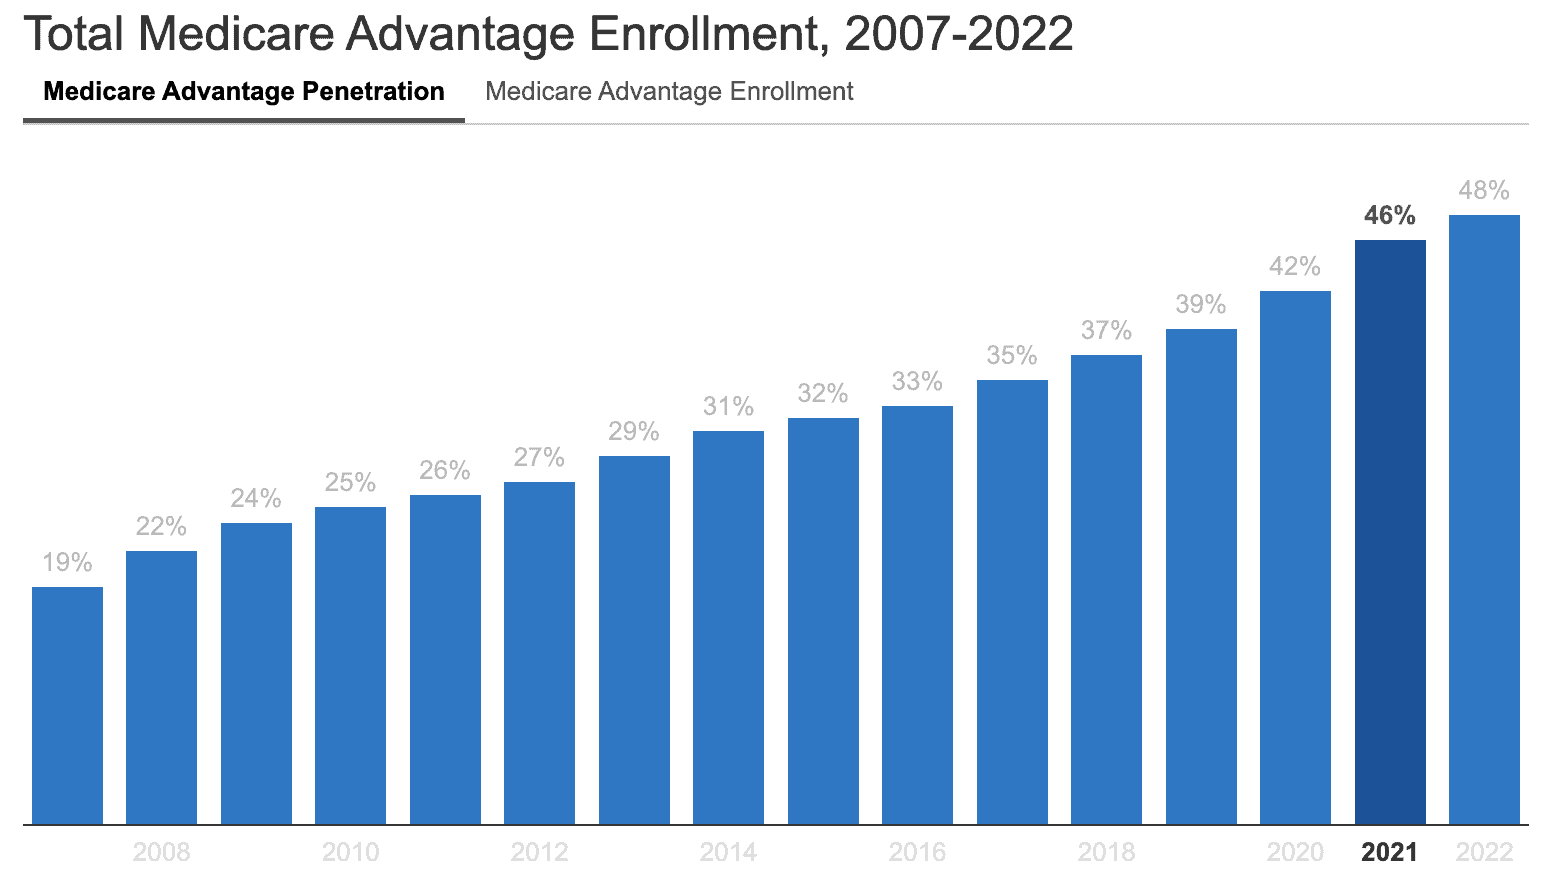 The percentage of Medicare beneficiaries enrolled in Medicare Advantage has risen steadily over time. (Graph courtesy of the Kaiser Family Foundation)